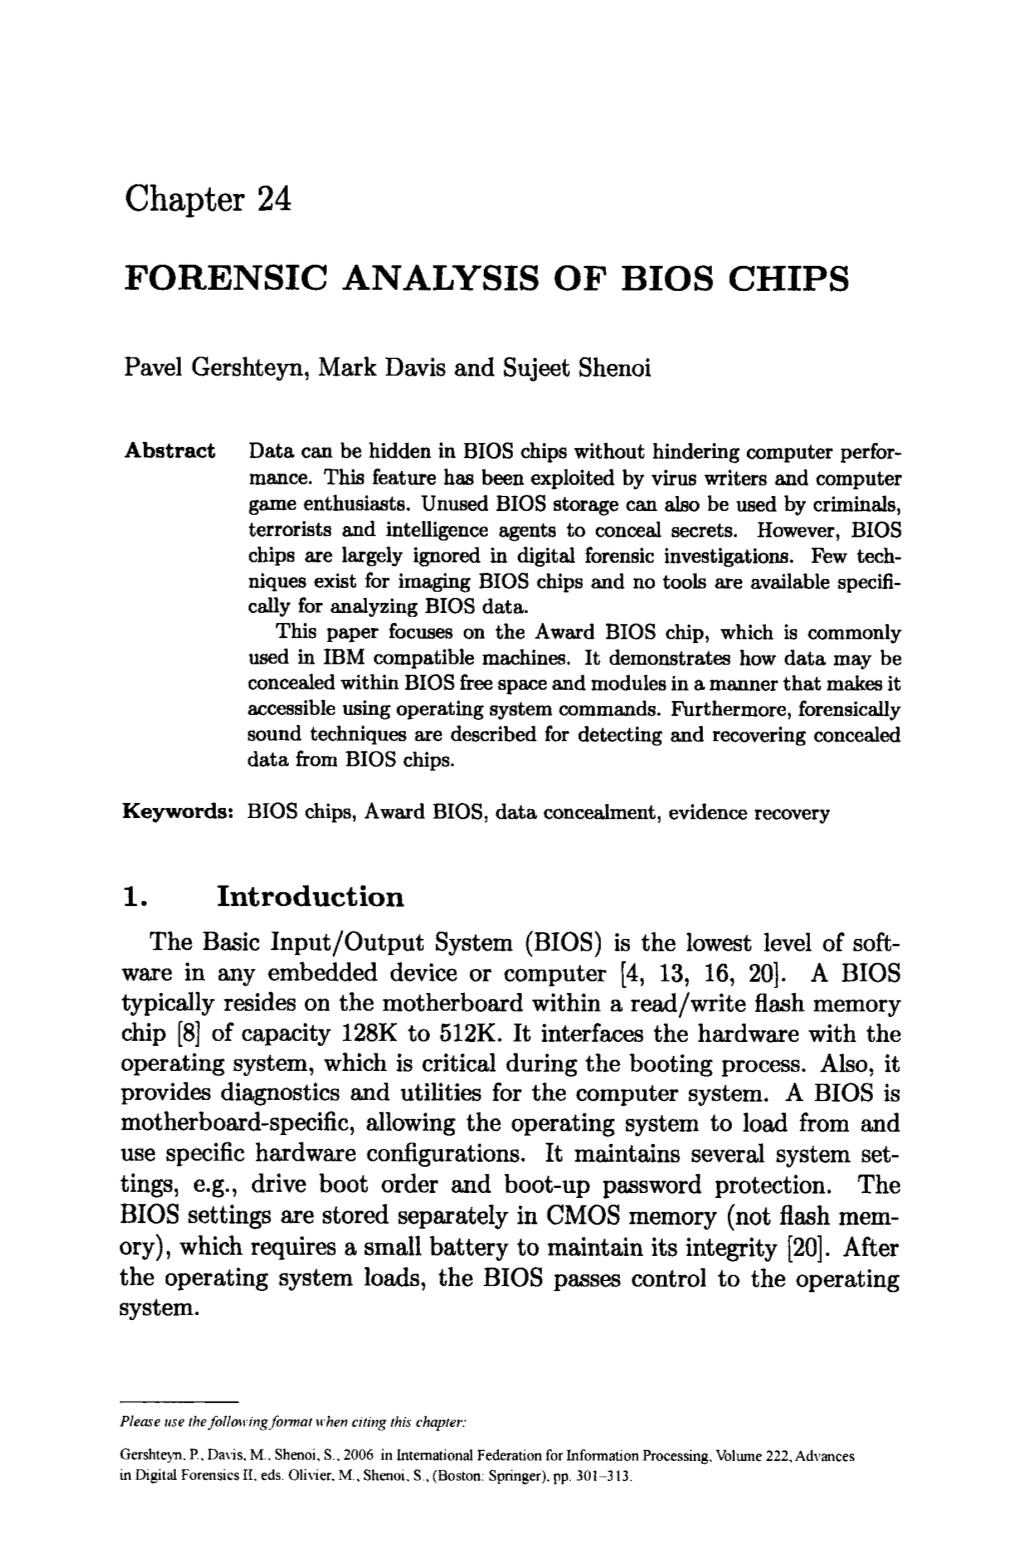 Chapter 24 FORENSIC ANALYSIS of BIOS CHIPS